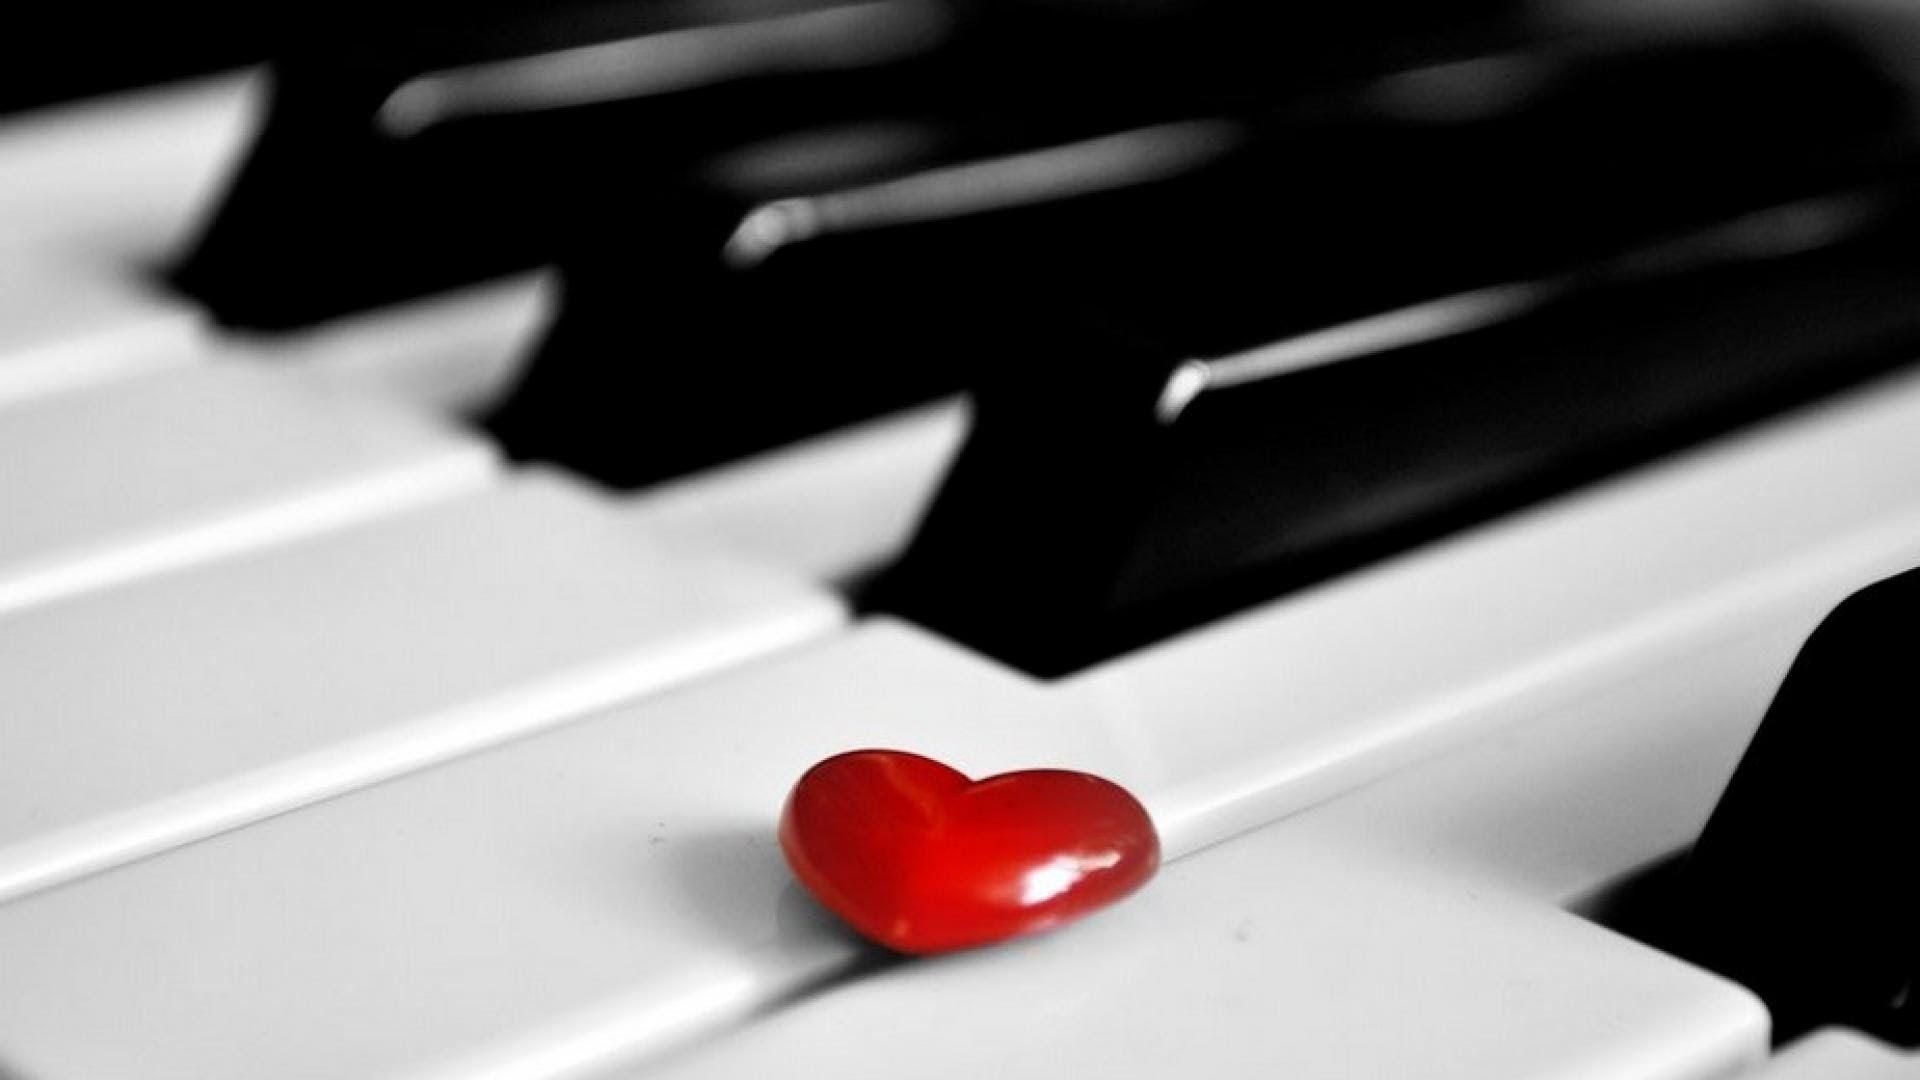 Romantic Piano Music: Background Music Instrumental for Love